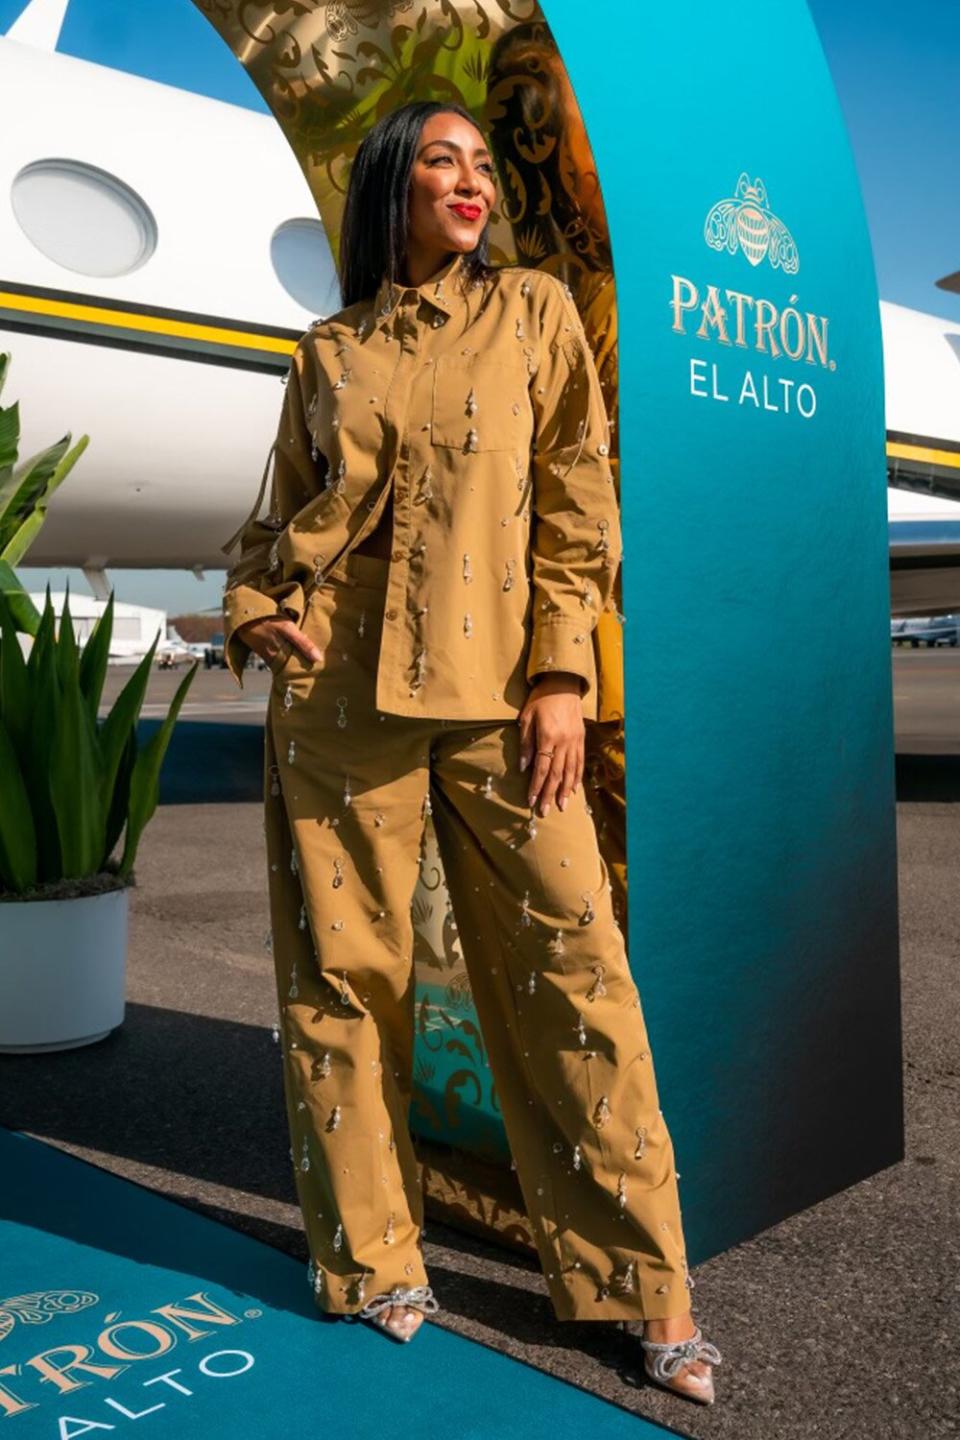  Missy Elliott toasts to an exciting weekend in Las Vegas with PATRÓN EL ALTO, celebrating the launch of the new tequila and her first performance since 2019, Madame Tussauds wax figure unveiling and 20th anniversary of her second studio album, Under Construction.   PHOTO CREDIT: Derek Blanks